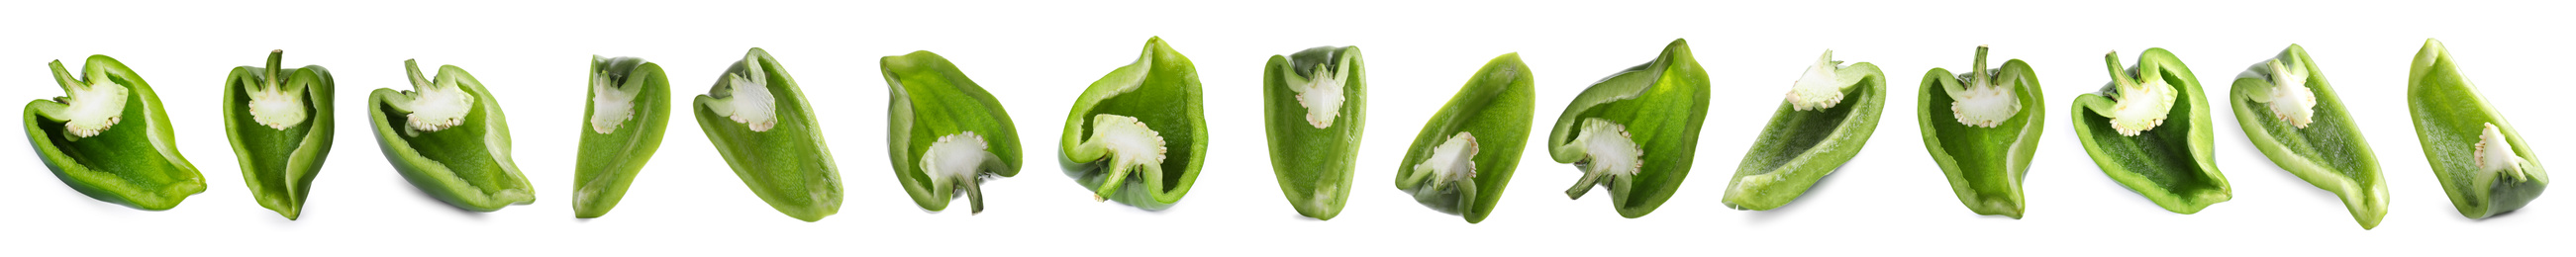 Set of cut ripe green bell peppers on white background/ Banner design 